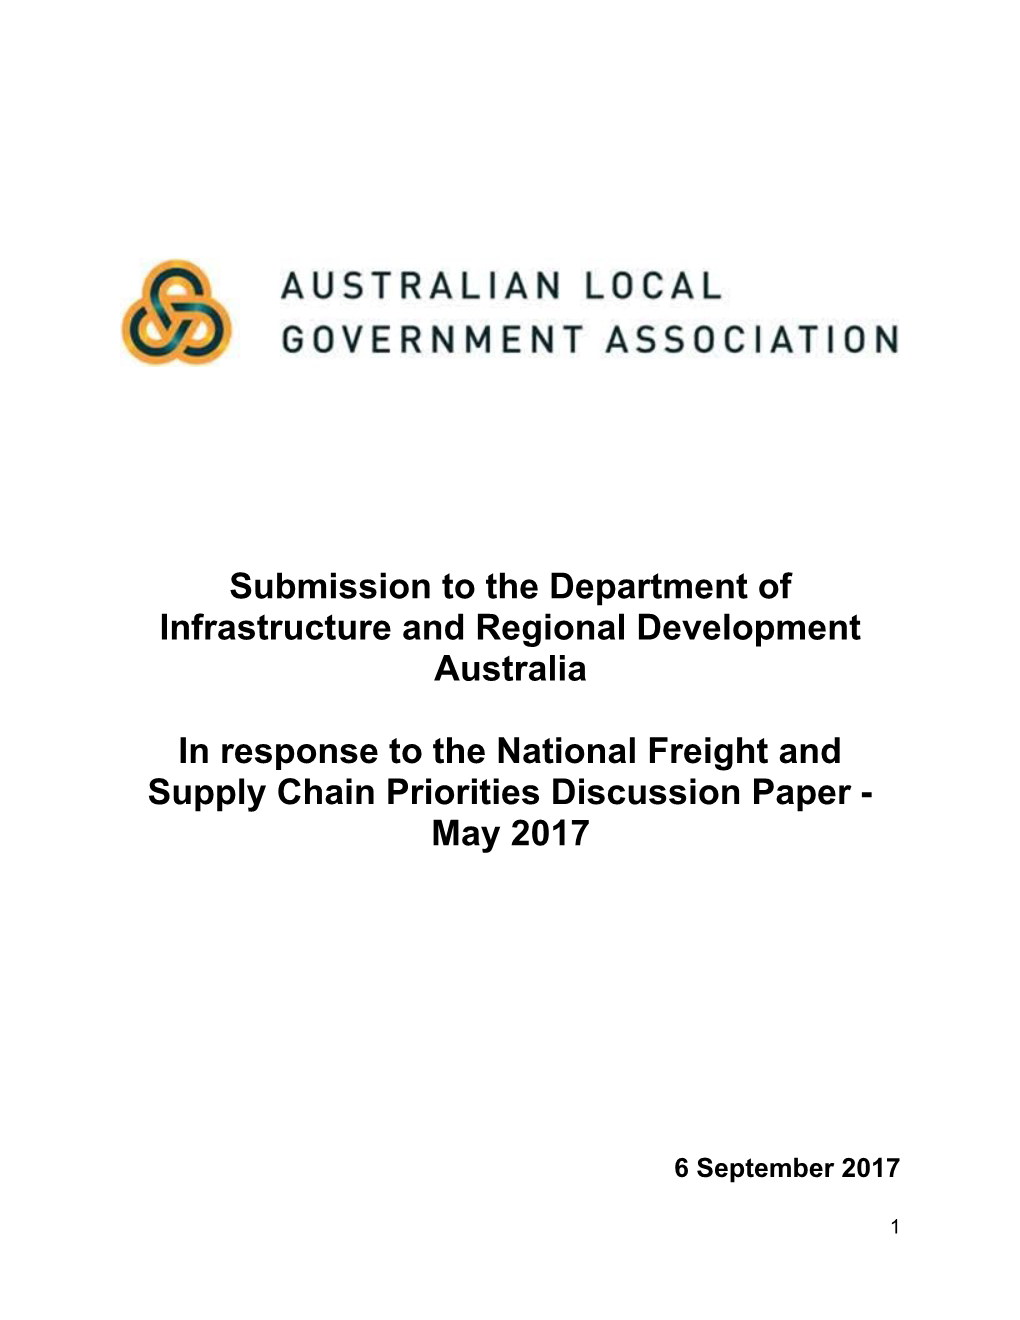 Submission to the Department of Infrastructure and Regional Development Australia